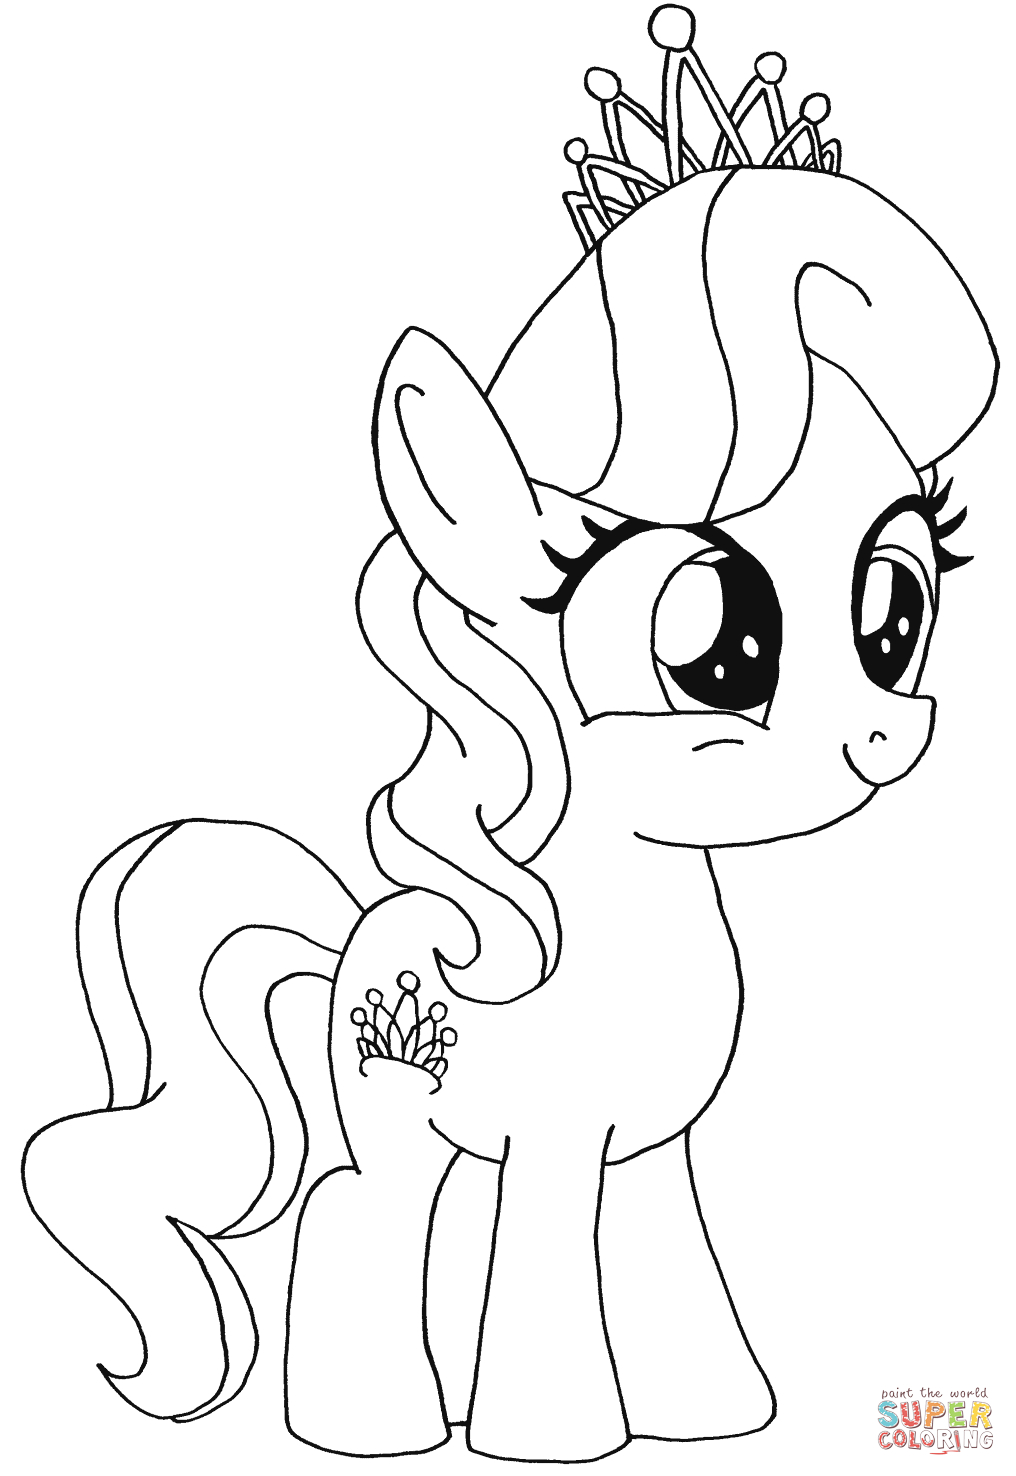 Coloring Pages Of Diamonds Easy Diamond Coloring Page With Diamond Tiara My Little Pony